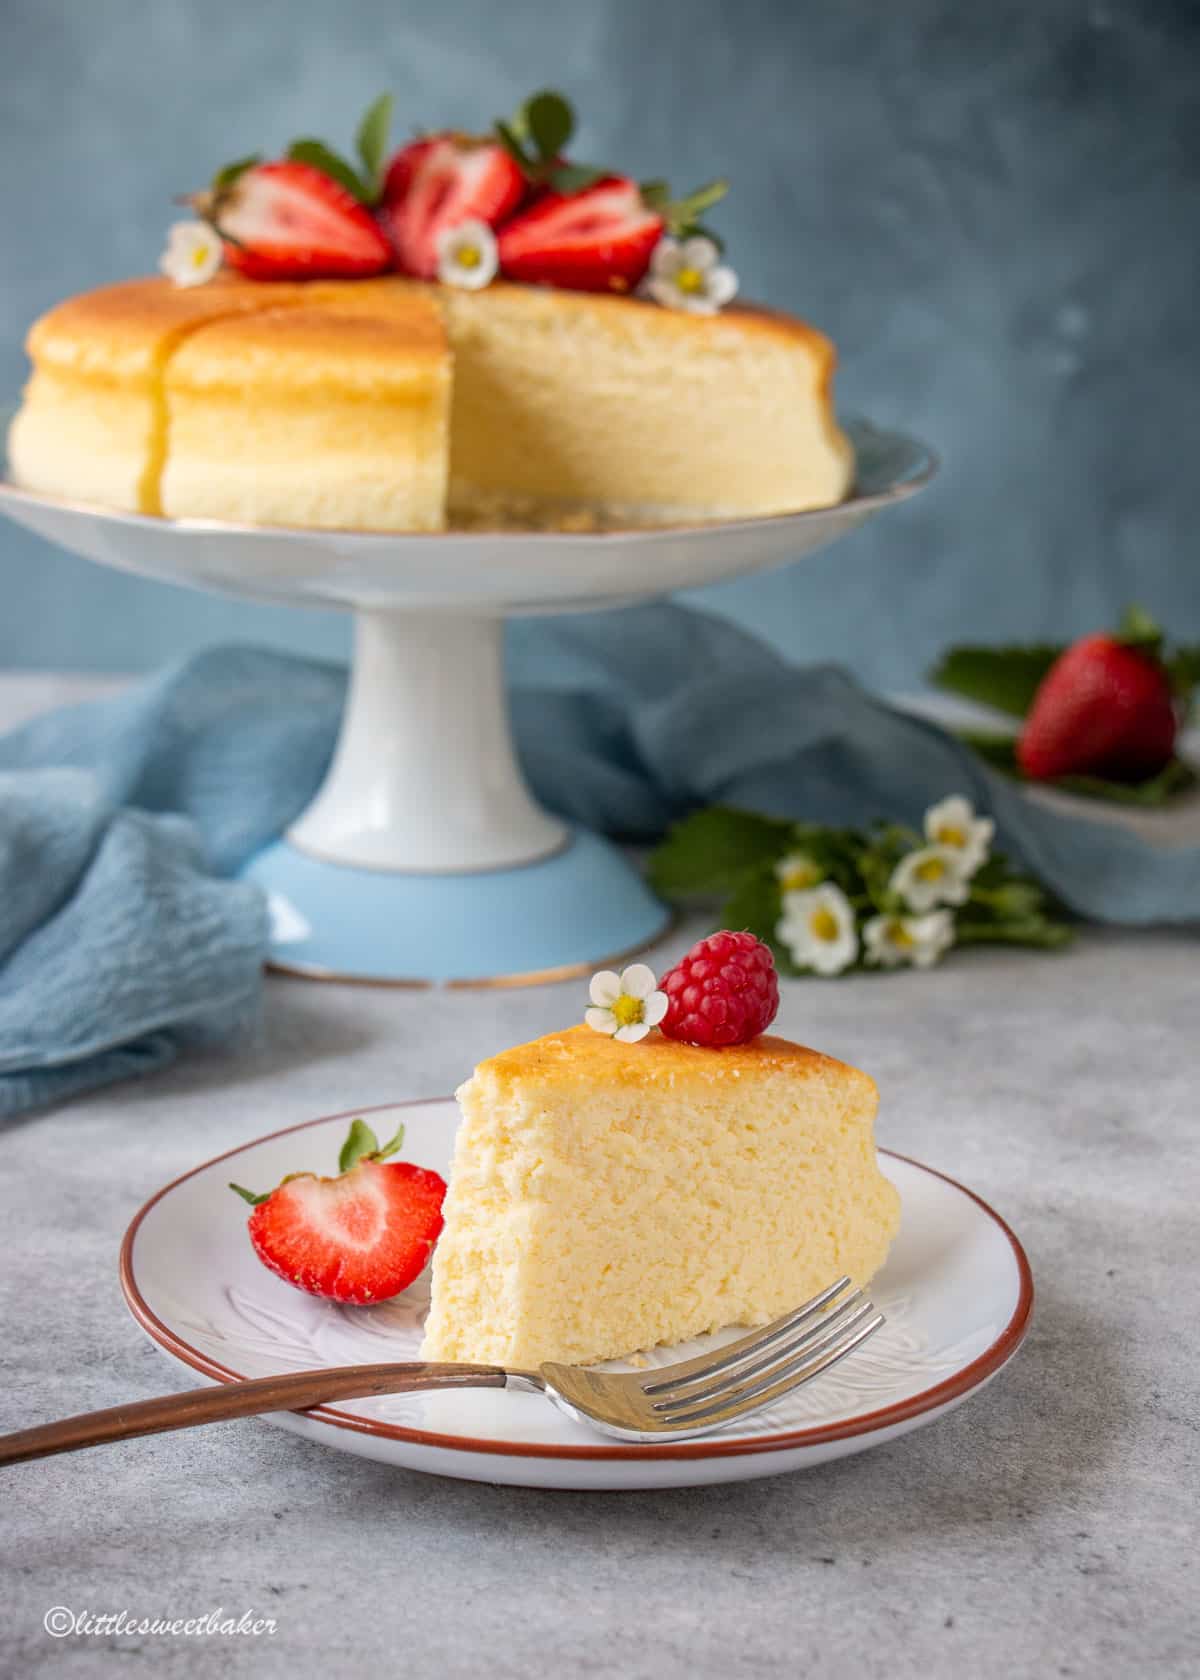 A slice of cotton cheesecake on a plate with a piece missing and the rest of the cake in the background.